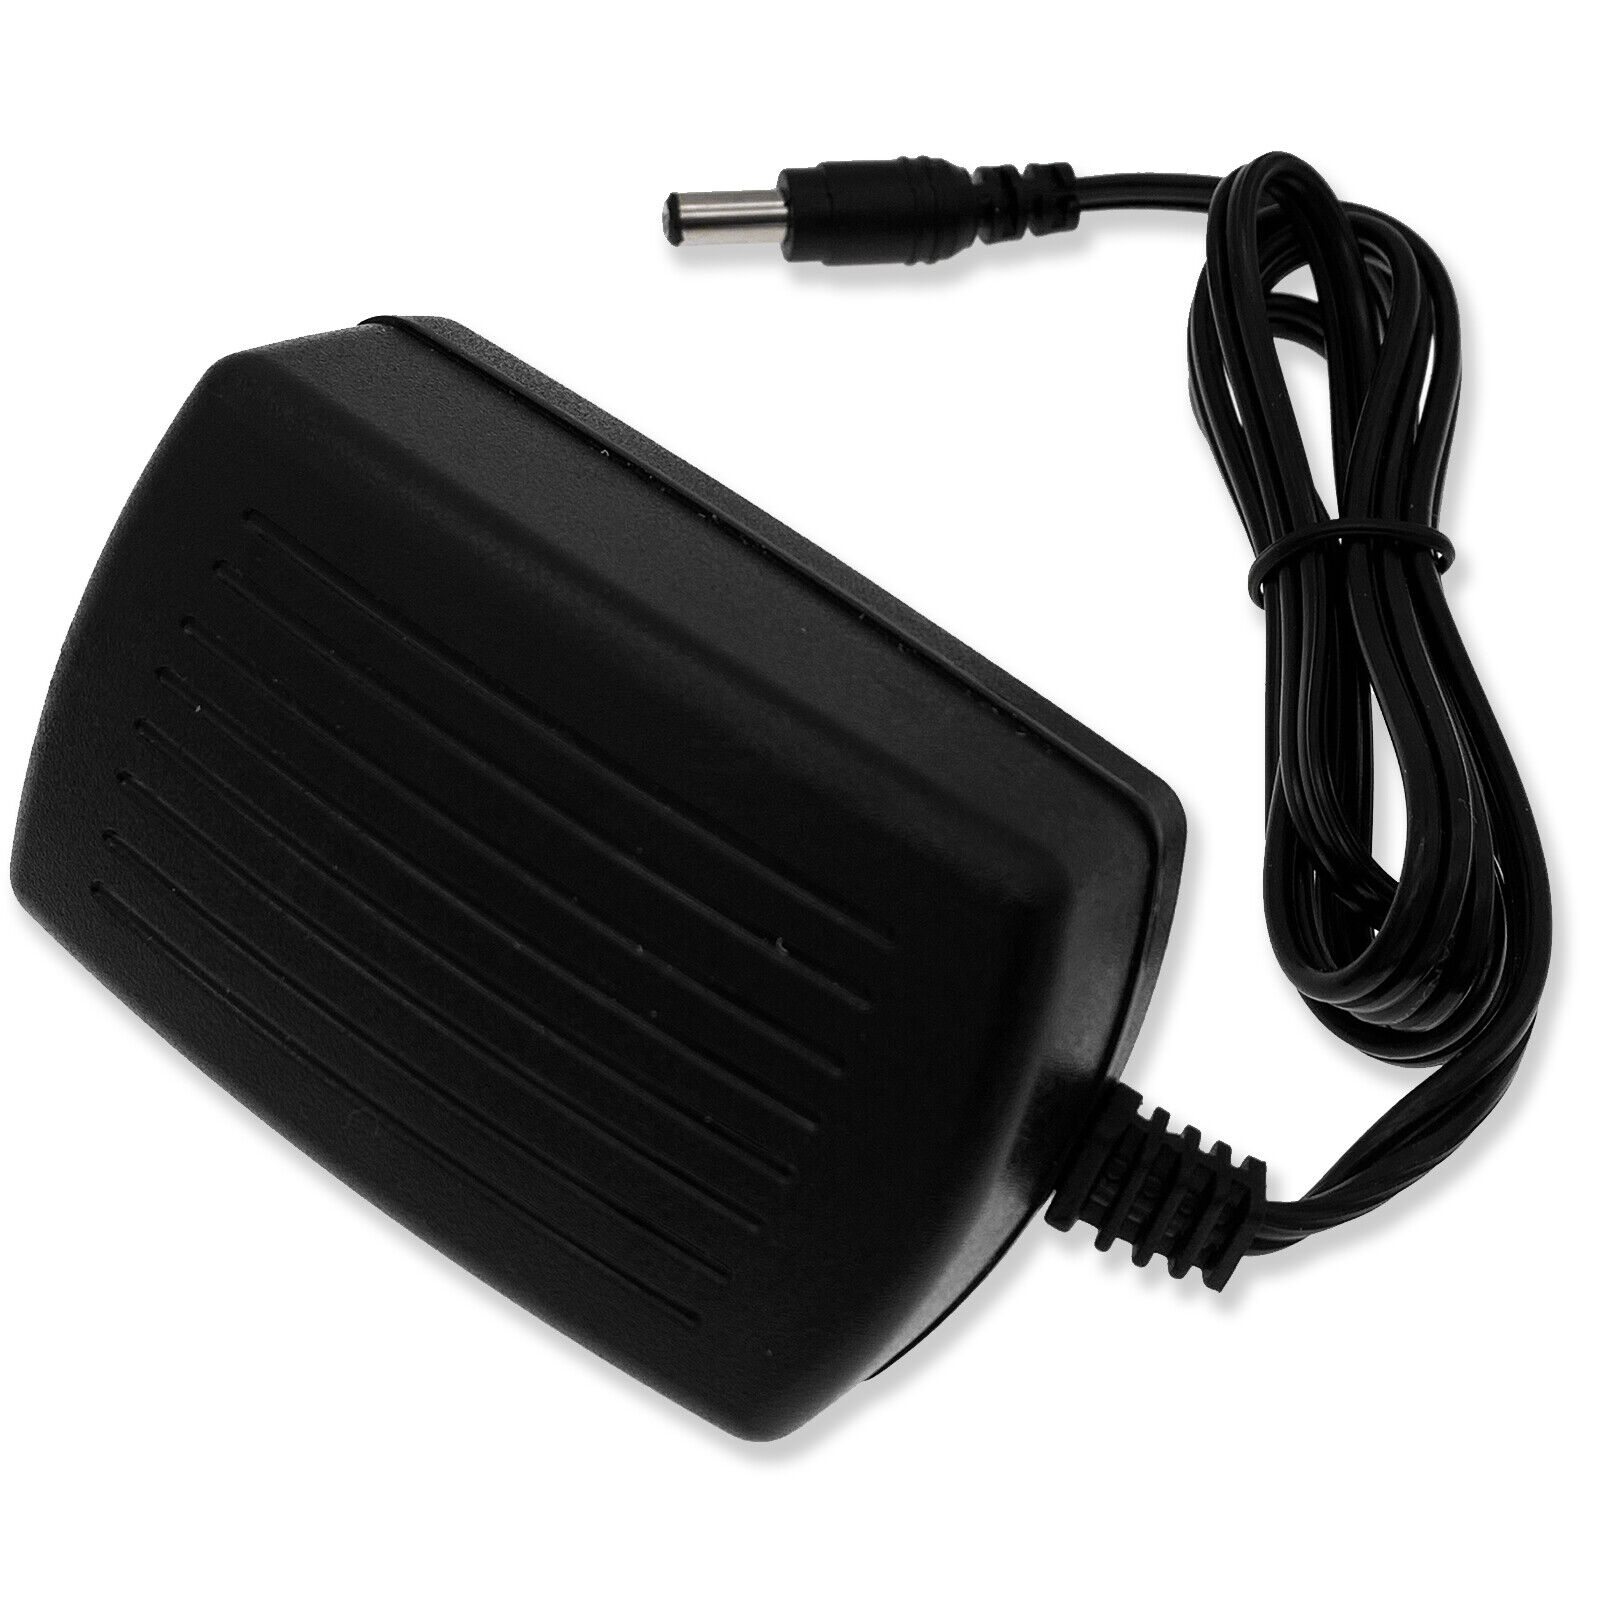 *Brand NEW*Proscenic Summer P1 P1 P2 P3 Vaccum Cleaner AC Adapter Power Supply Charger